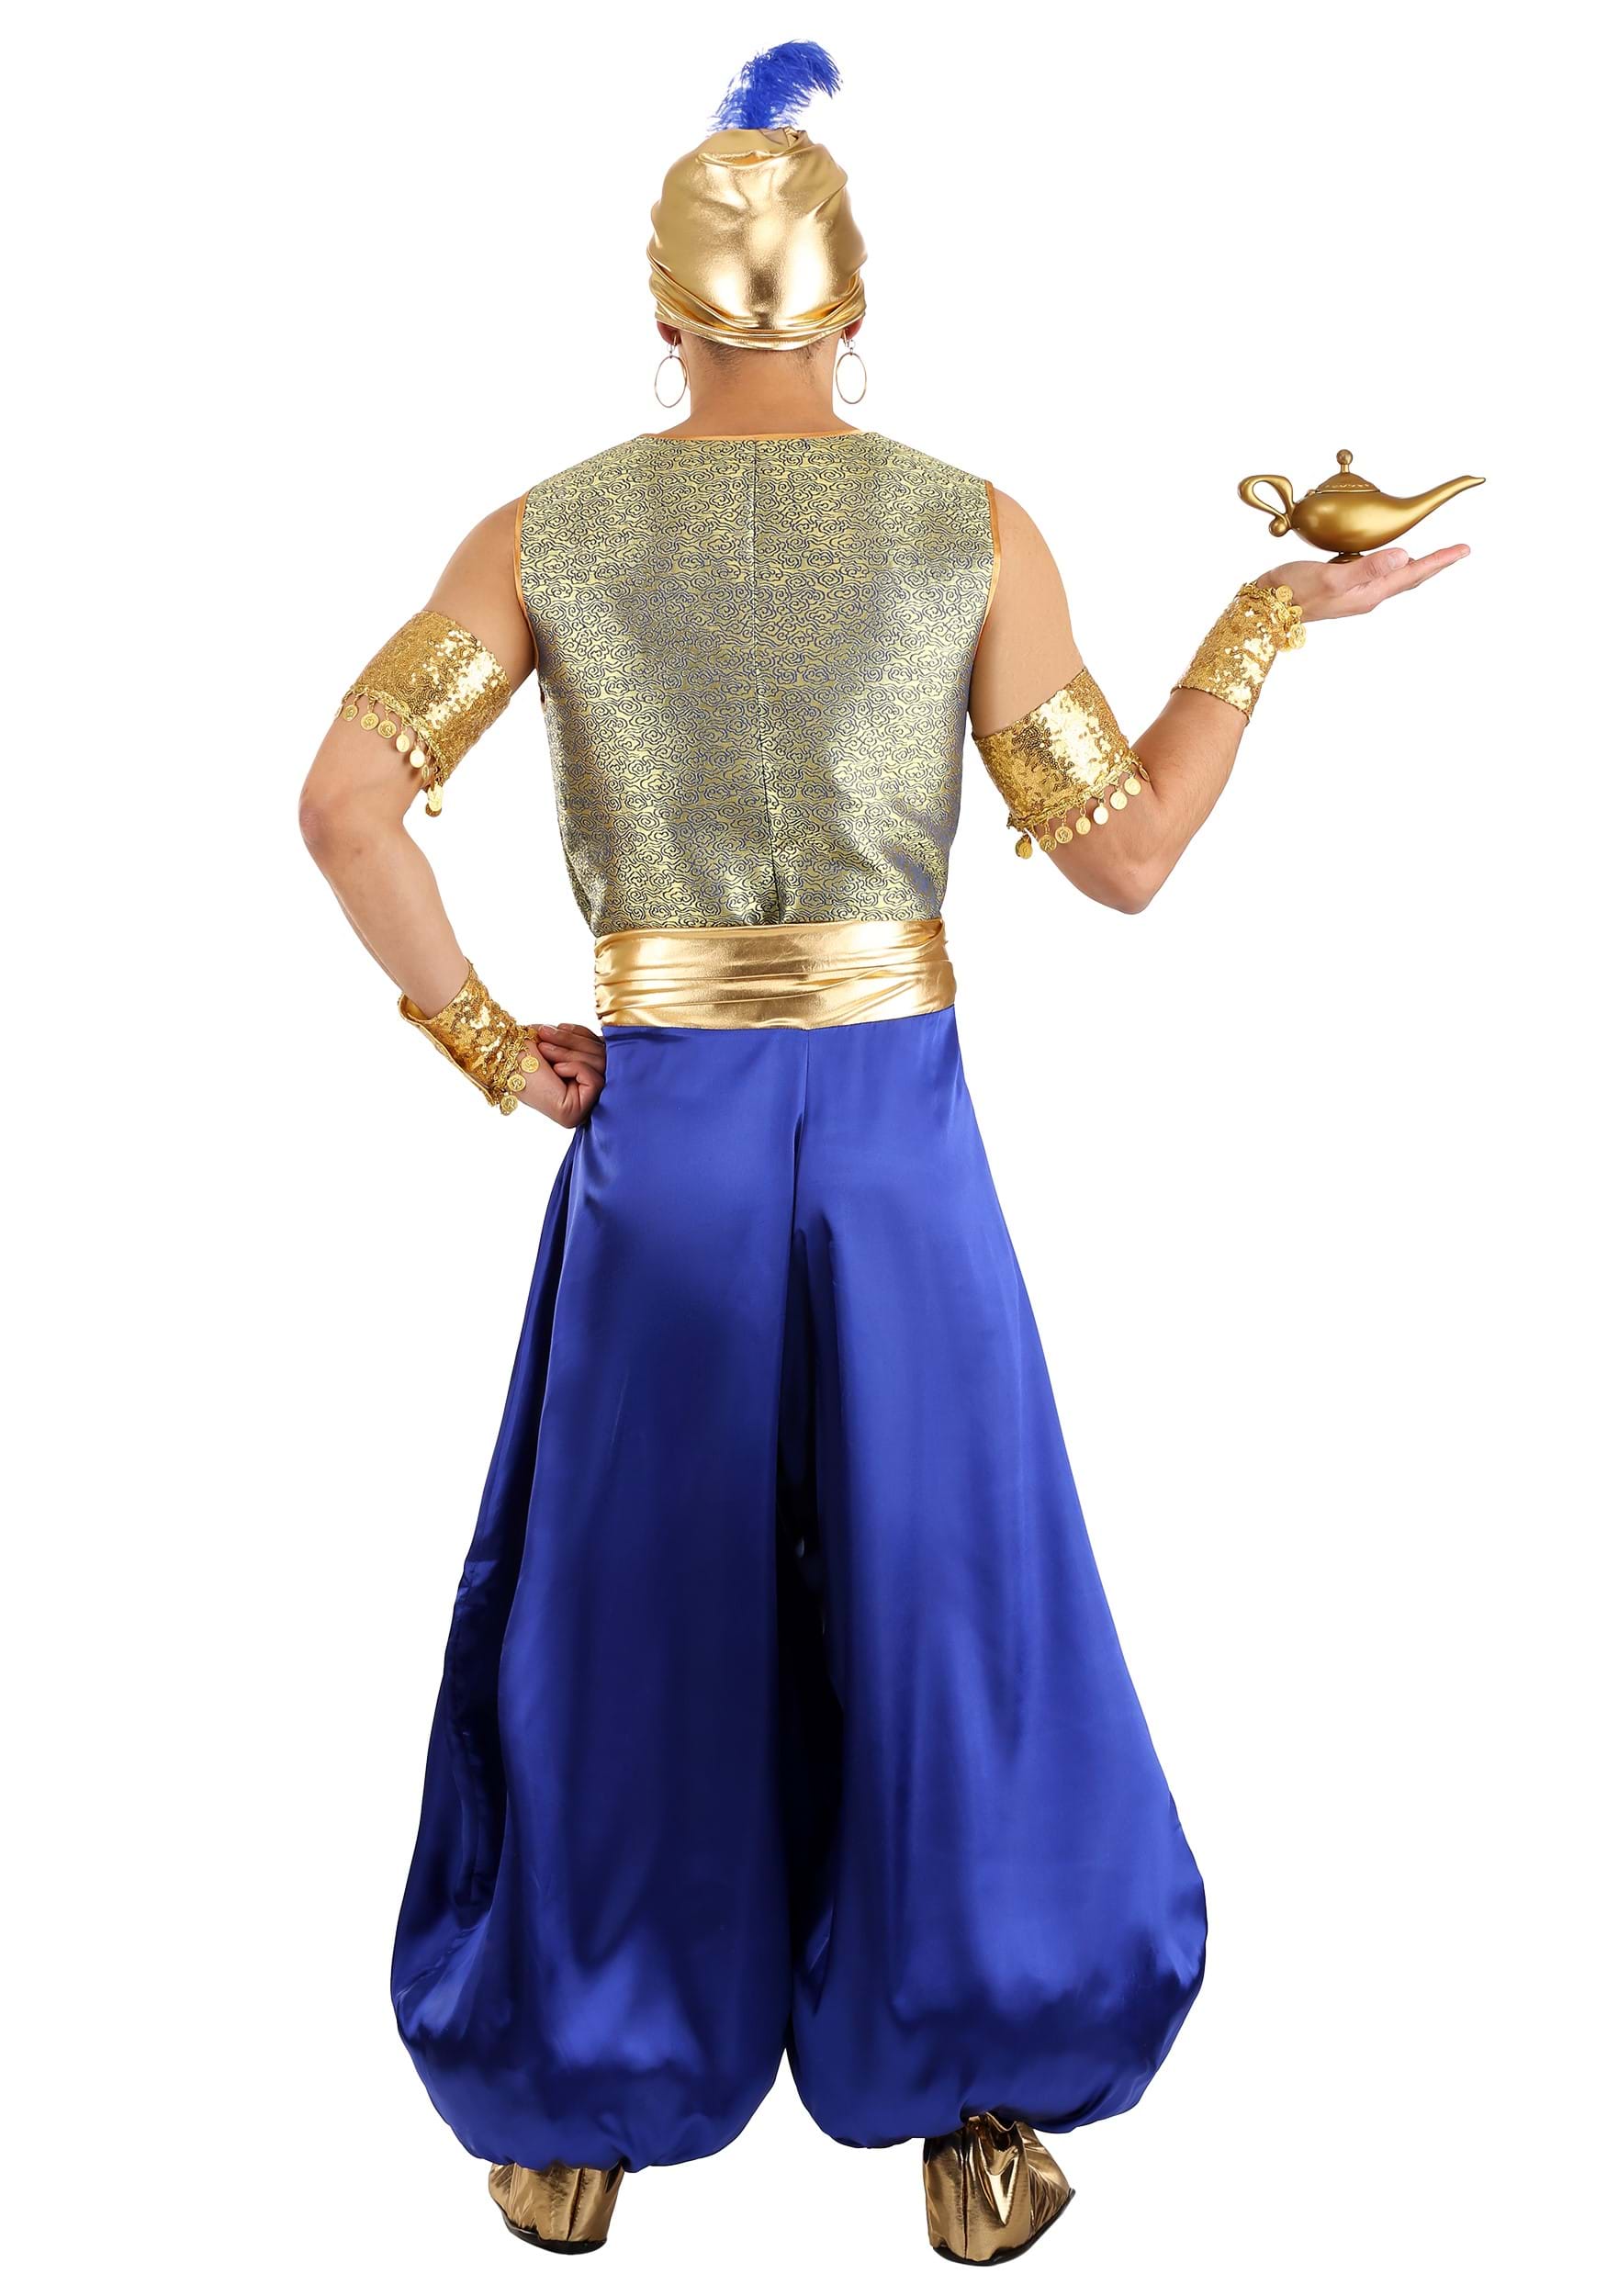 https://images.fun.com/products/67556/2-1-236680/adult-magical-genie-costume-alt-1.jpg